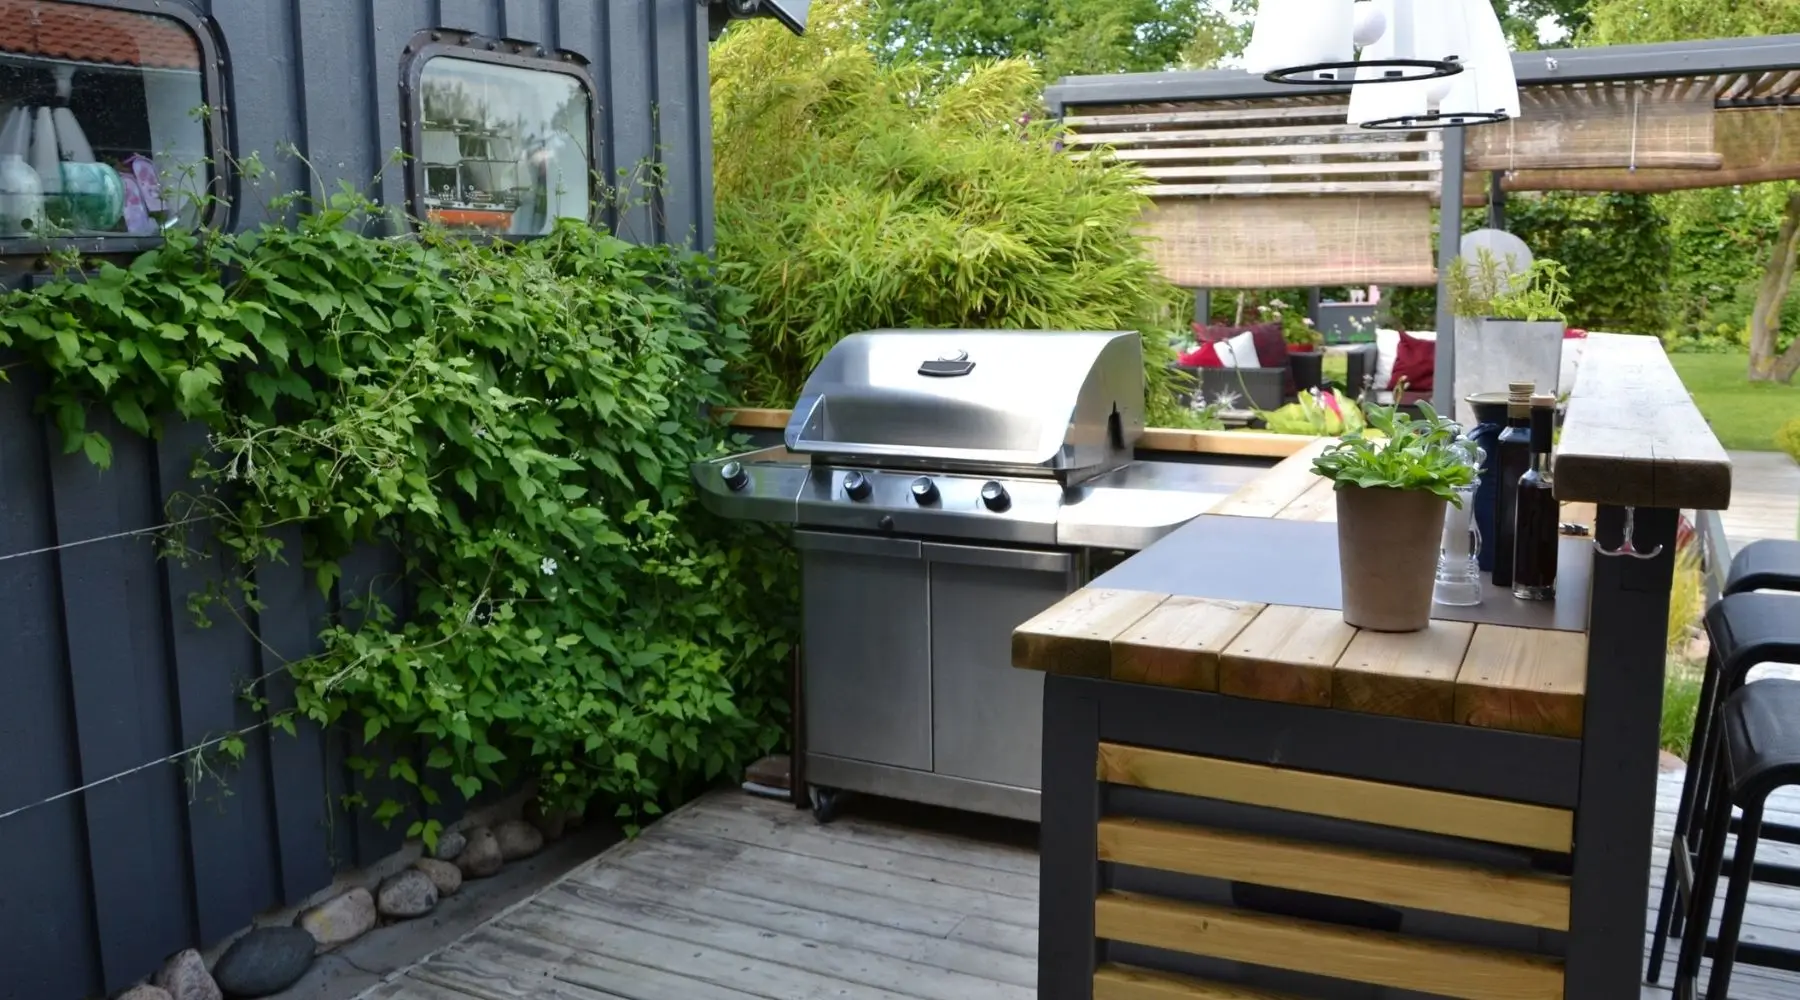 An outdoor kitchen, including a barbeque and countertops